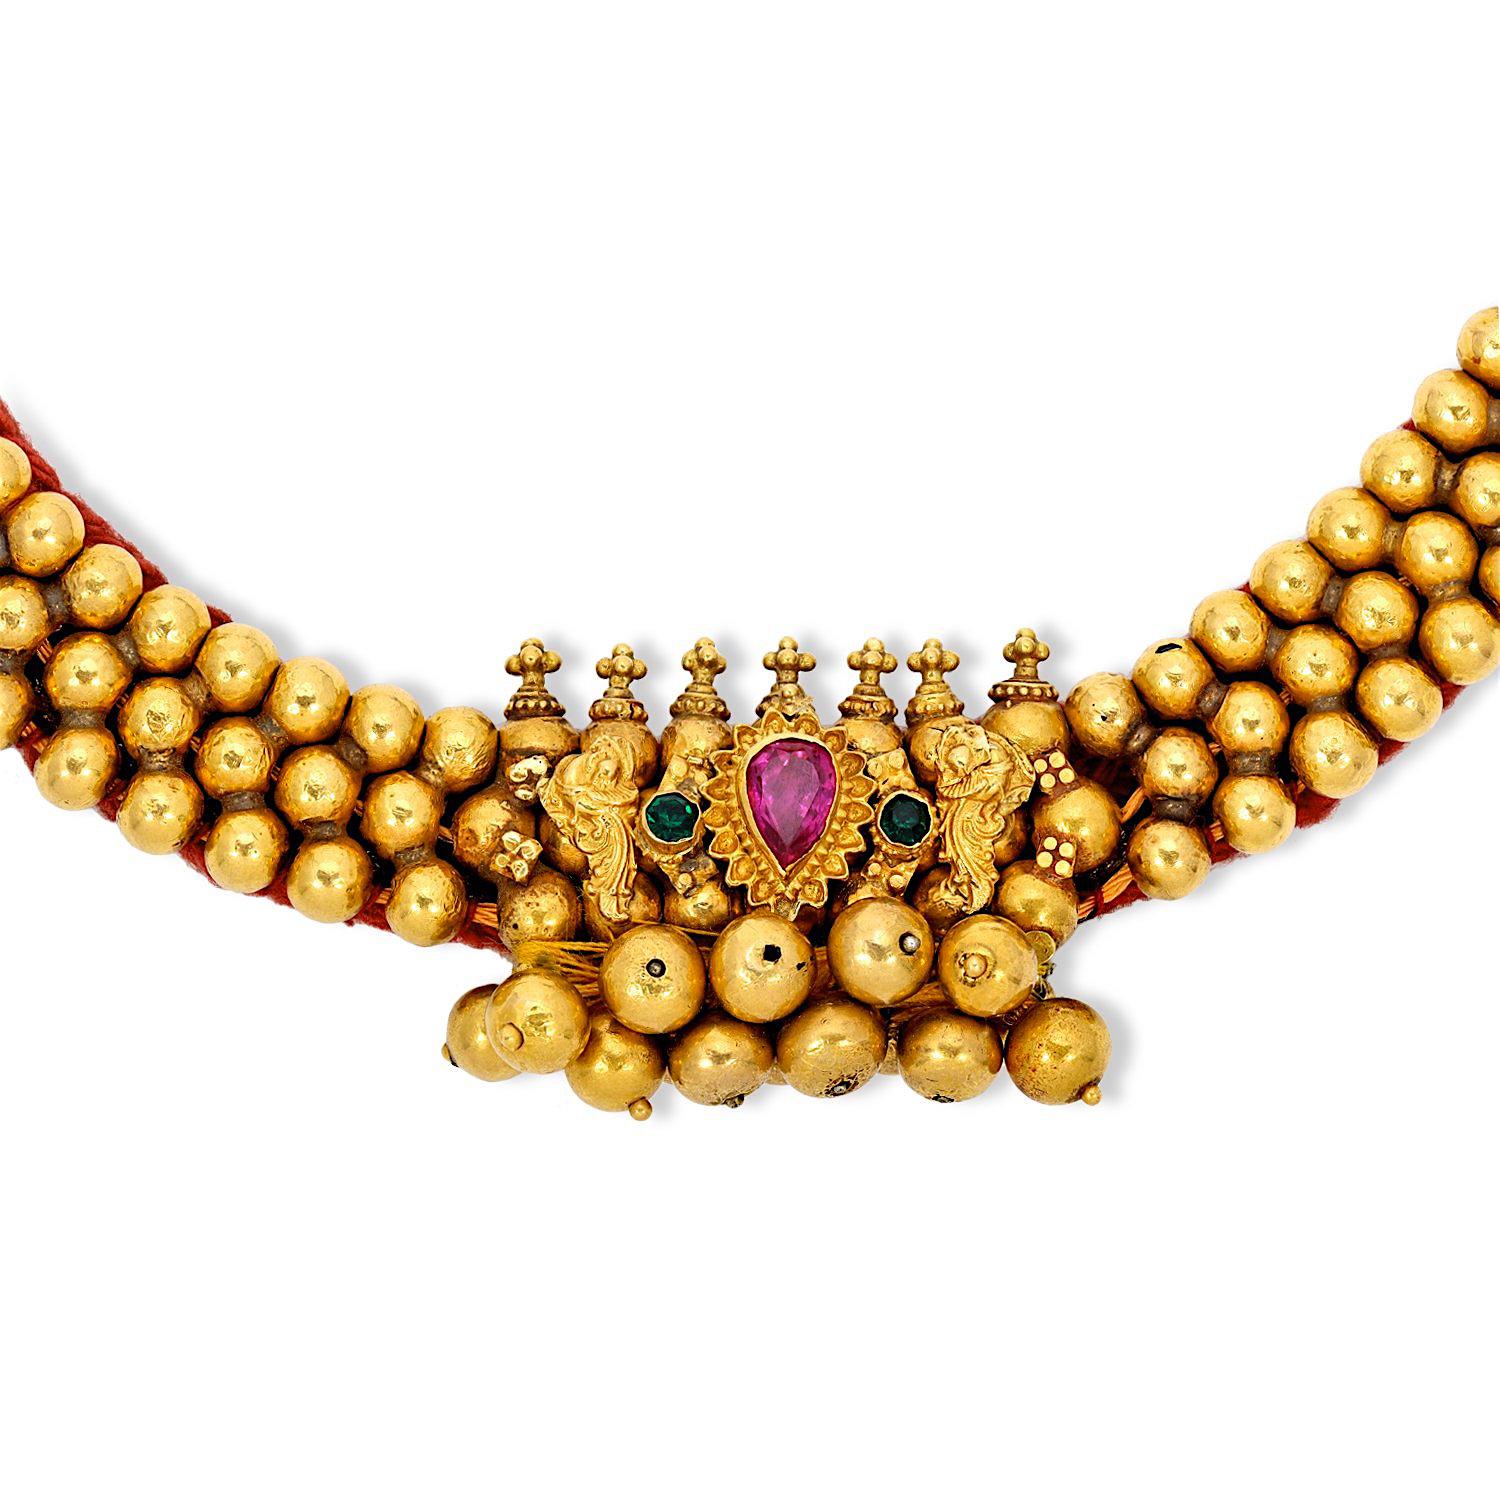 Part of a wedding dowry set from a temple in the south of India, this necklace is at least 100 years old and in pristine condition with the original adjustable cord and features semi precious stones in beautiful hues of magenta pink and emerald